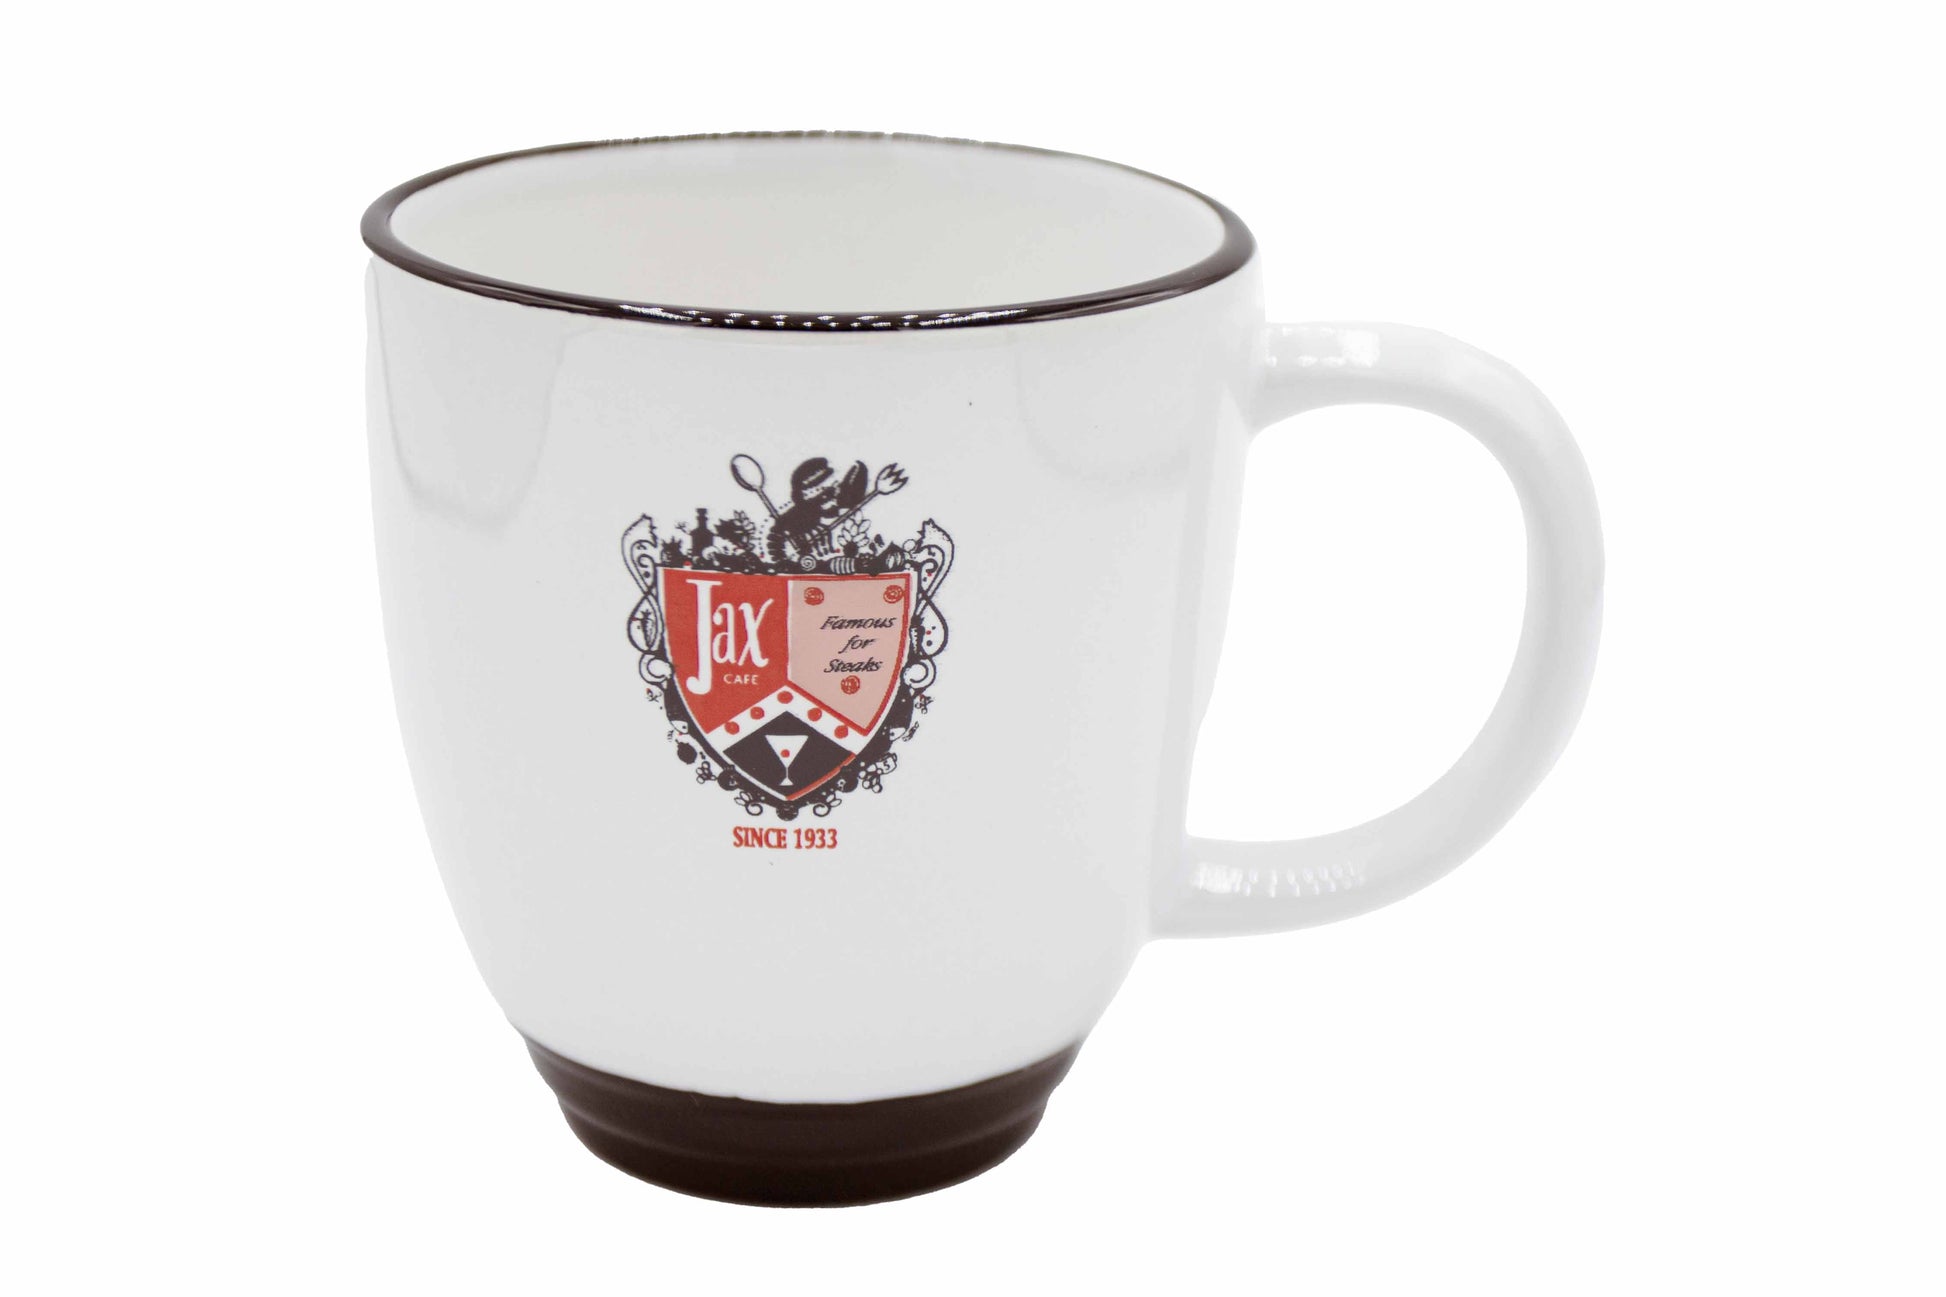 A coffee mug with the text "jax Cafe famous for steaks since 1933"